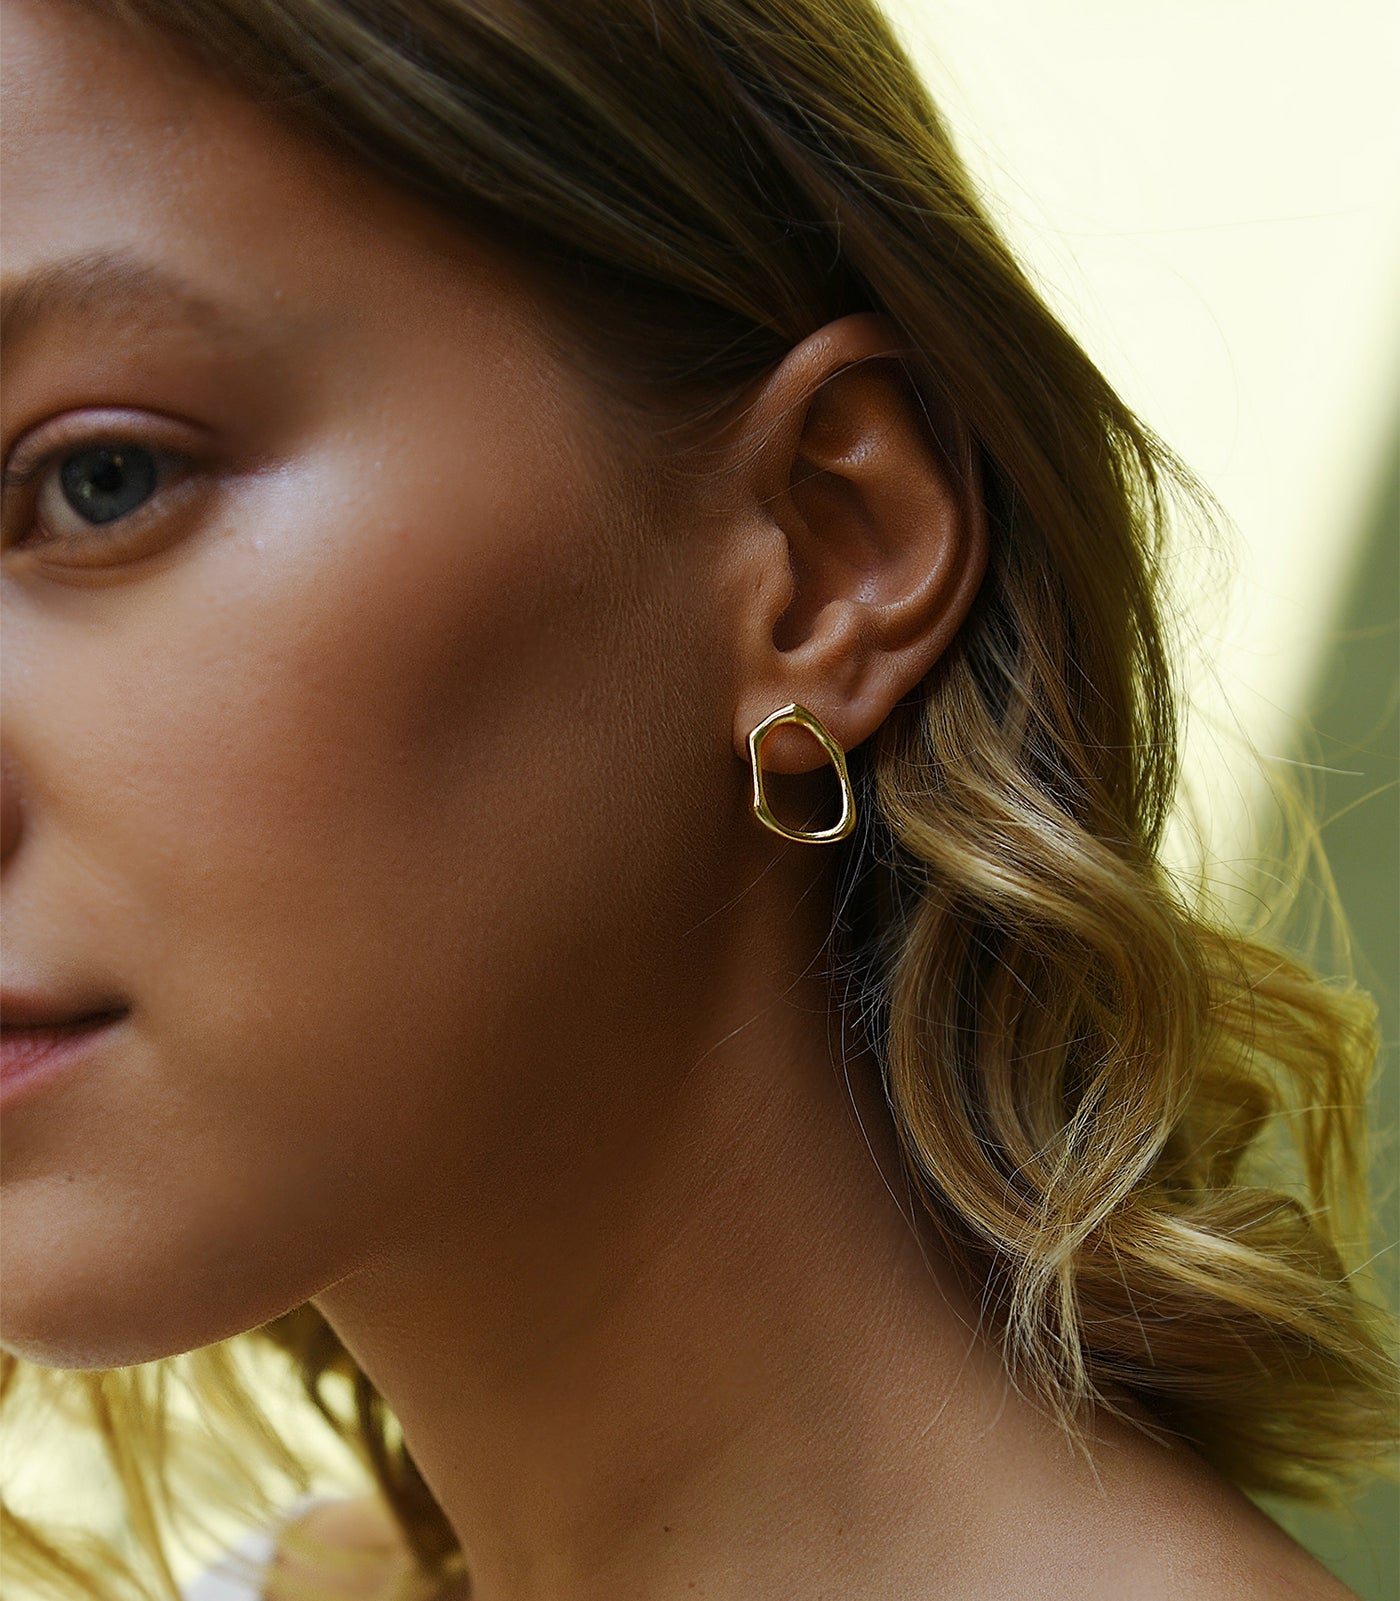 A model wears a gold vermeil, irregularly shaped, circle stud earring.